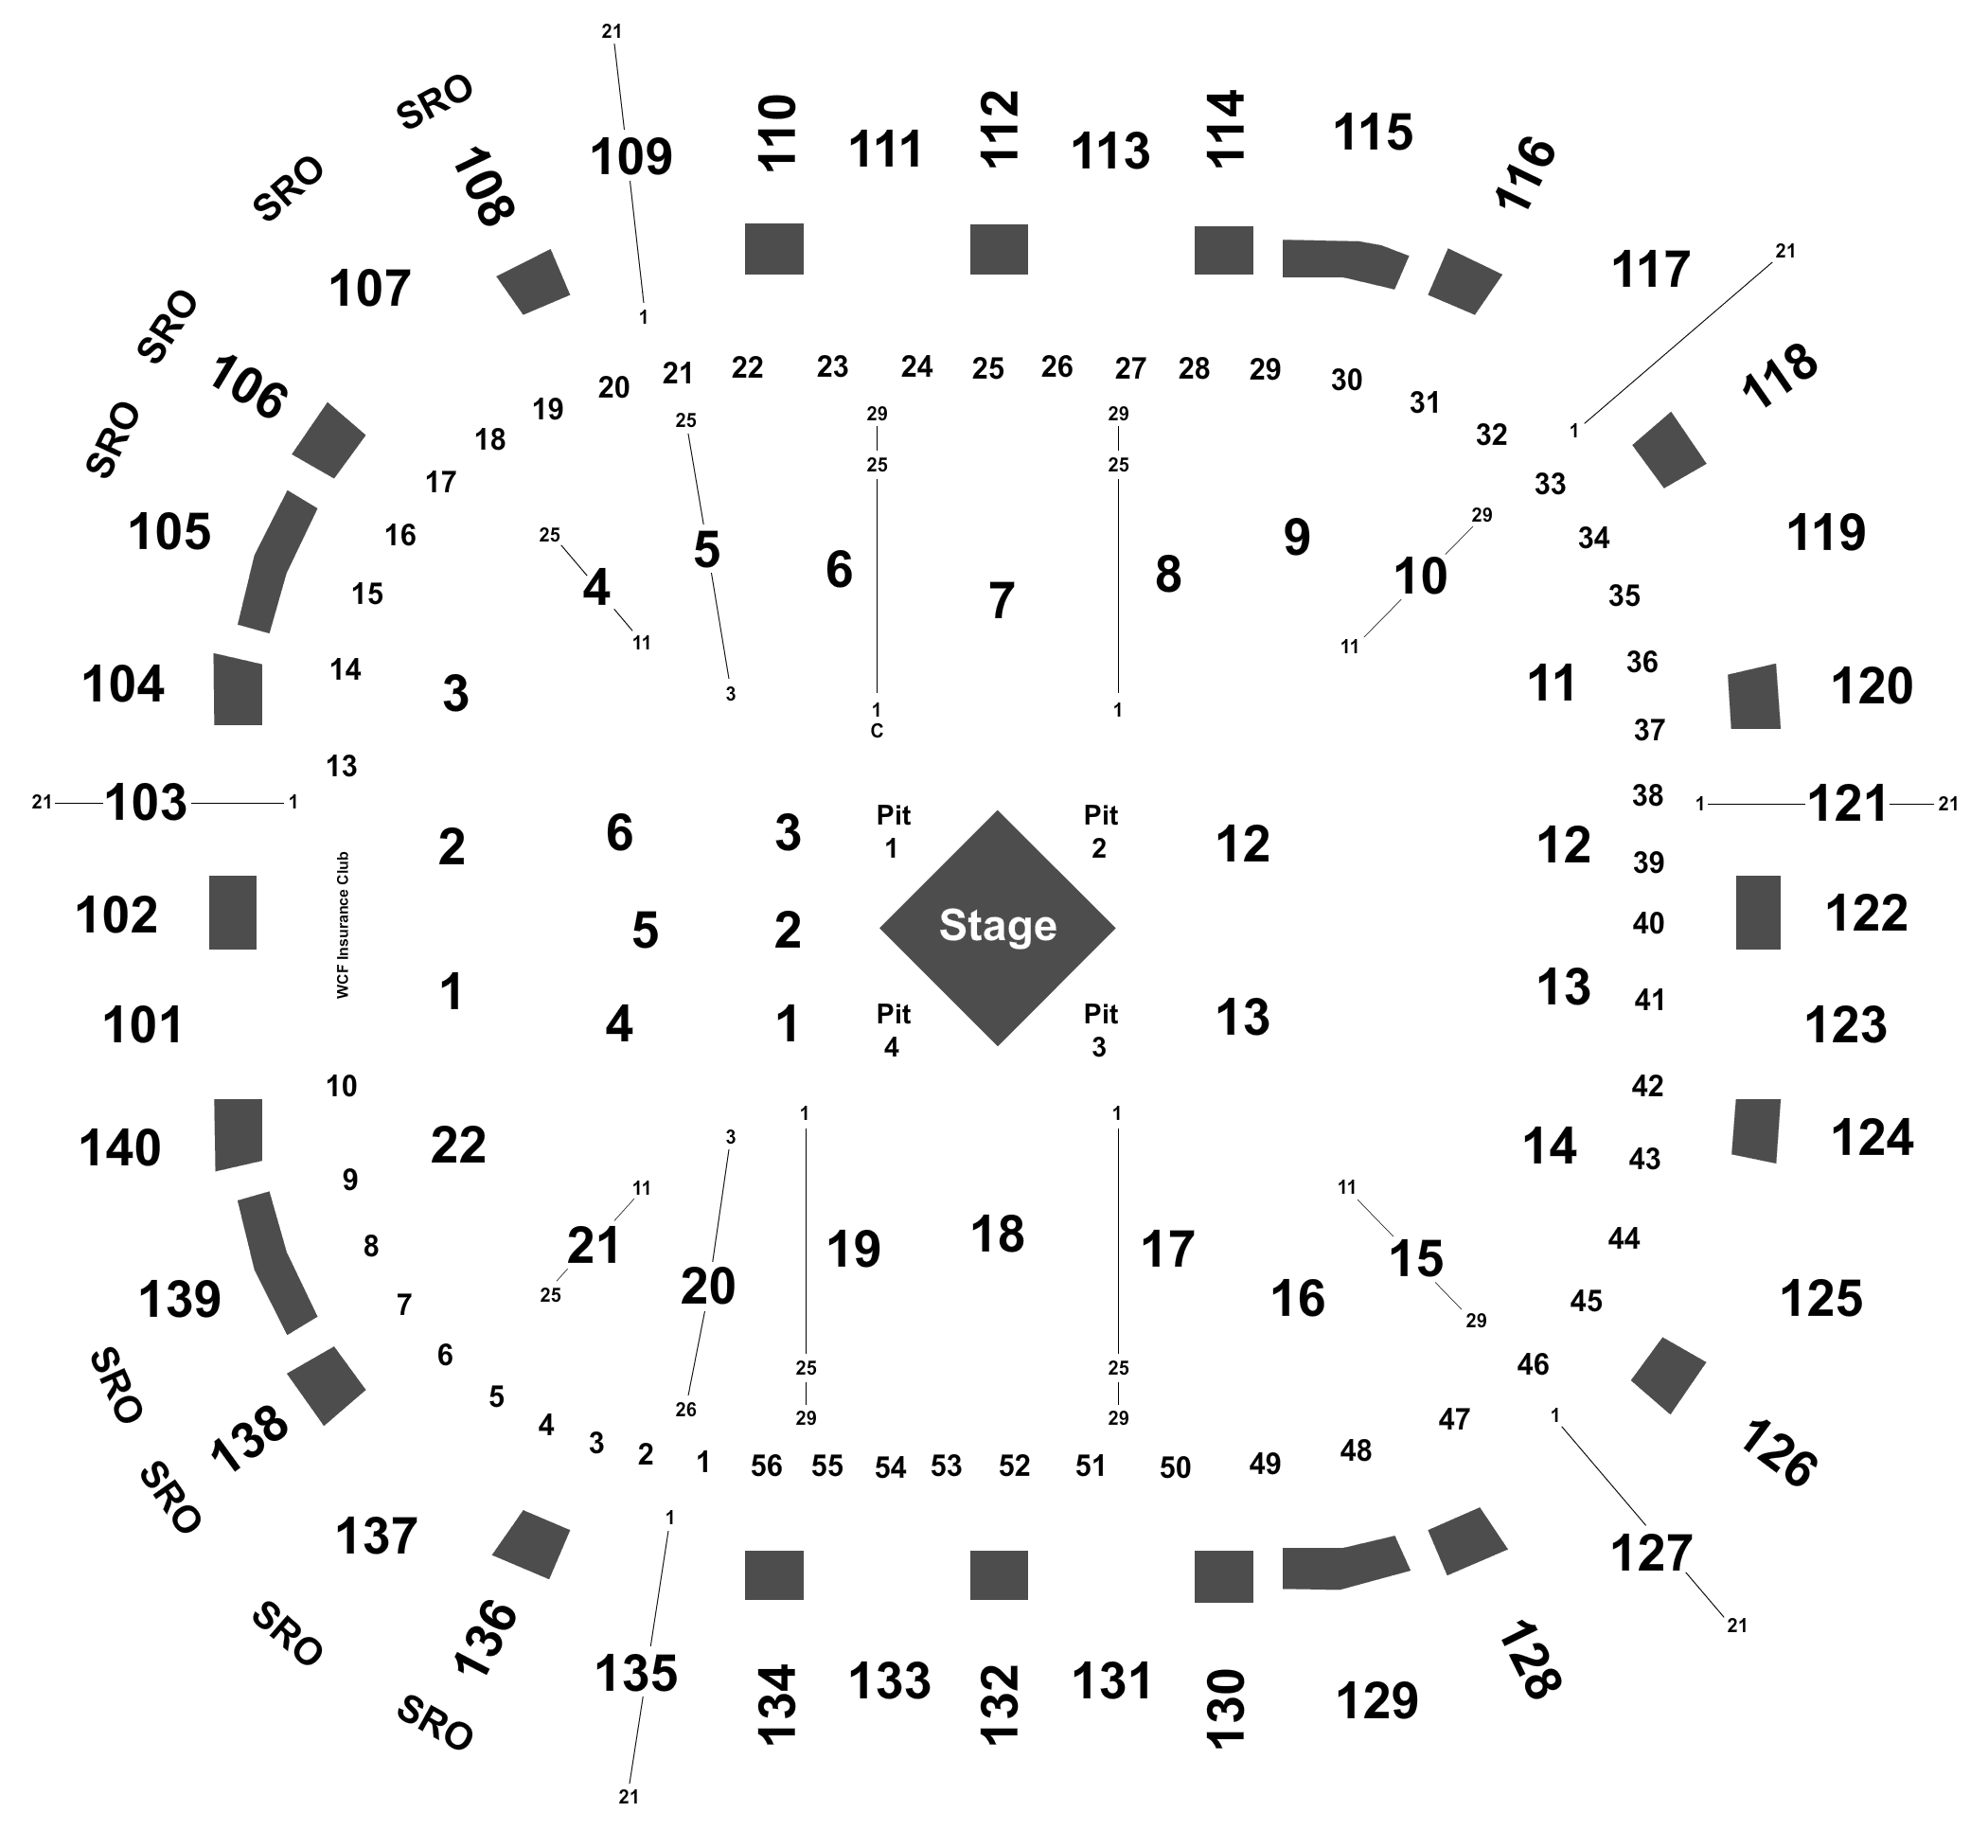 Download Luke Combs Ashley Mcbryde Ray Fulcher Tickets At Vivint Smart Home Arena 16 December 2021